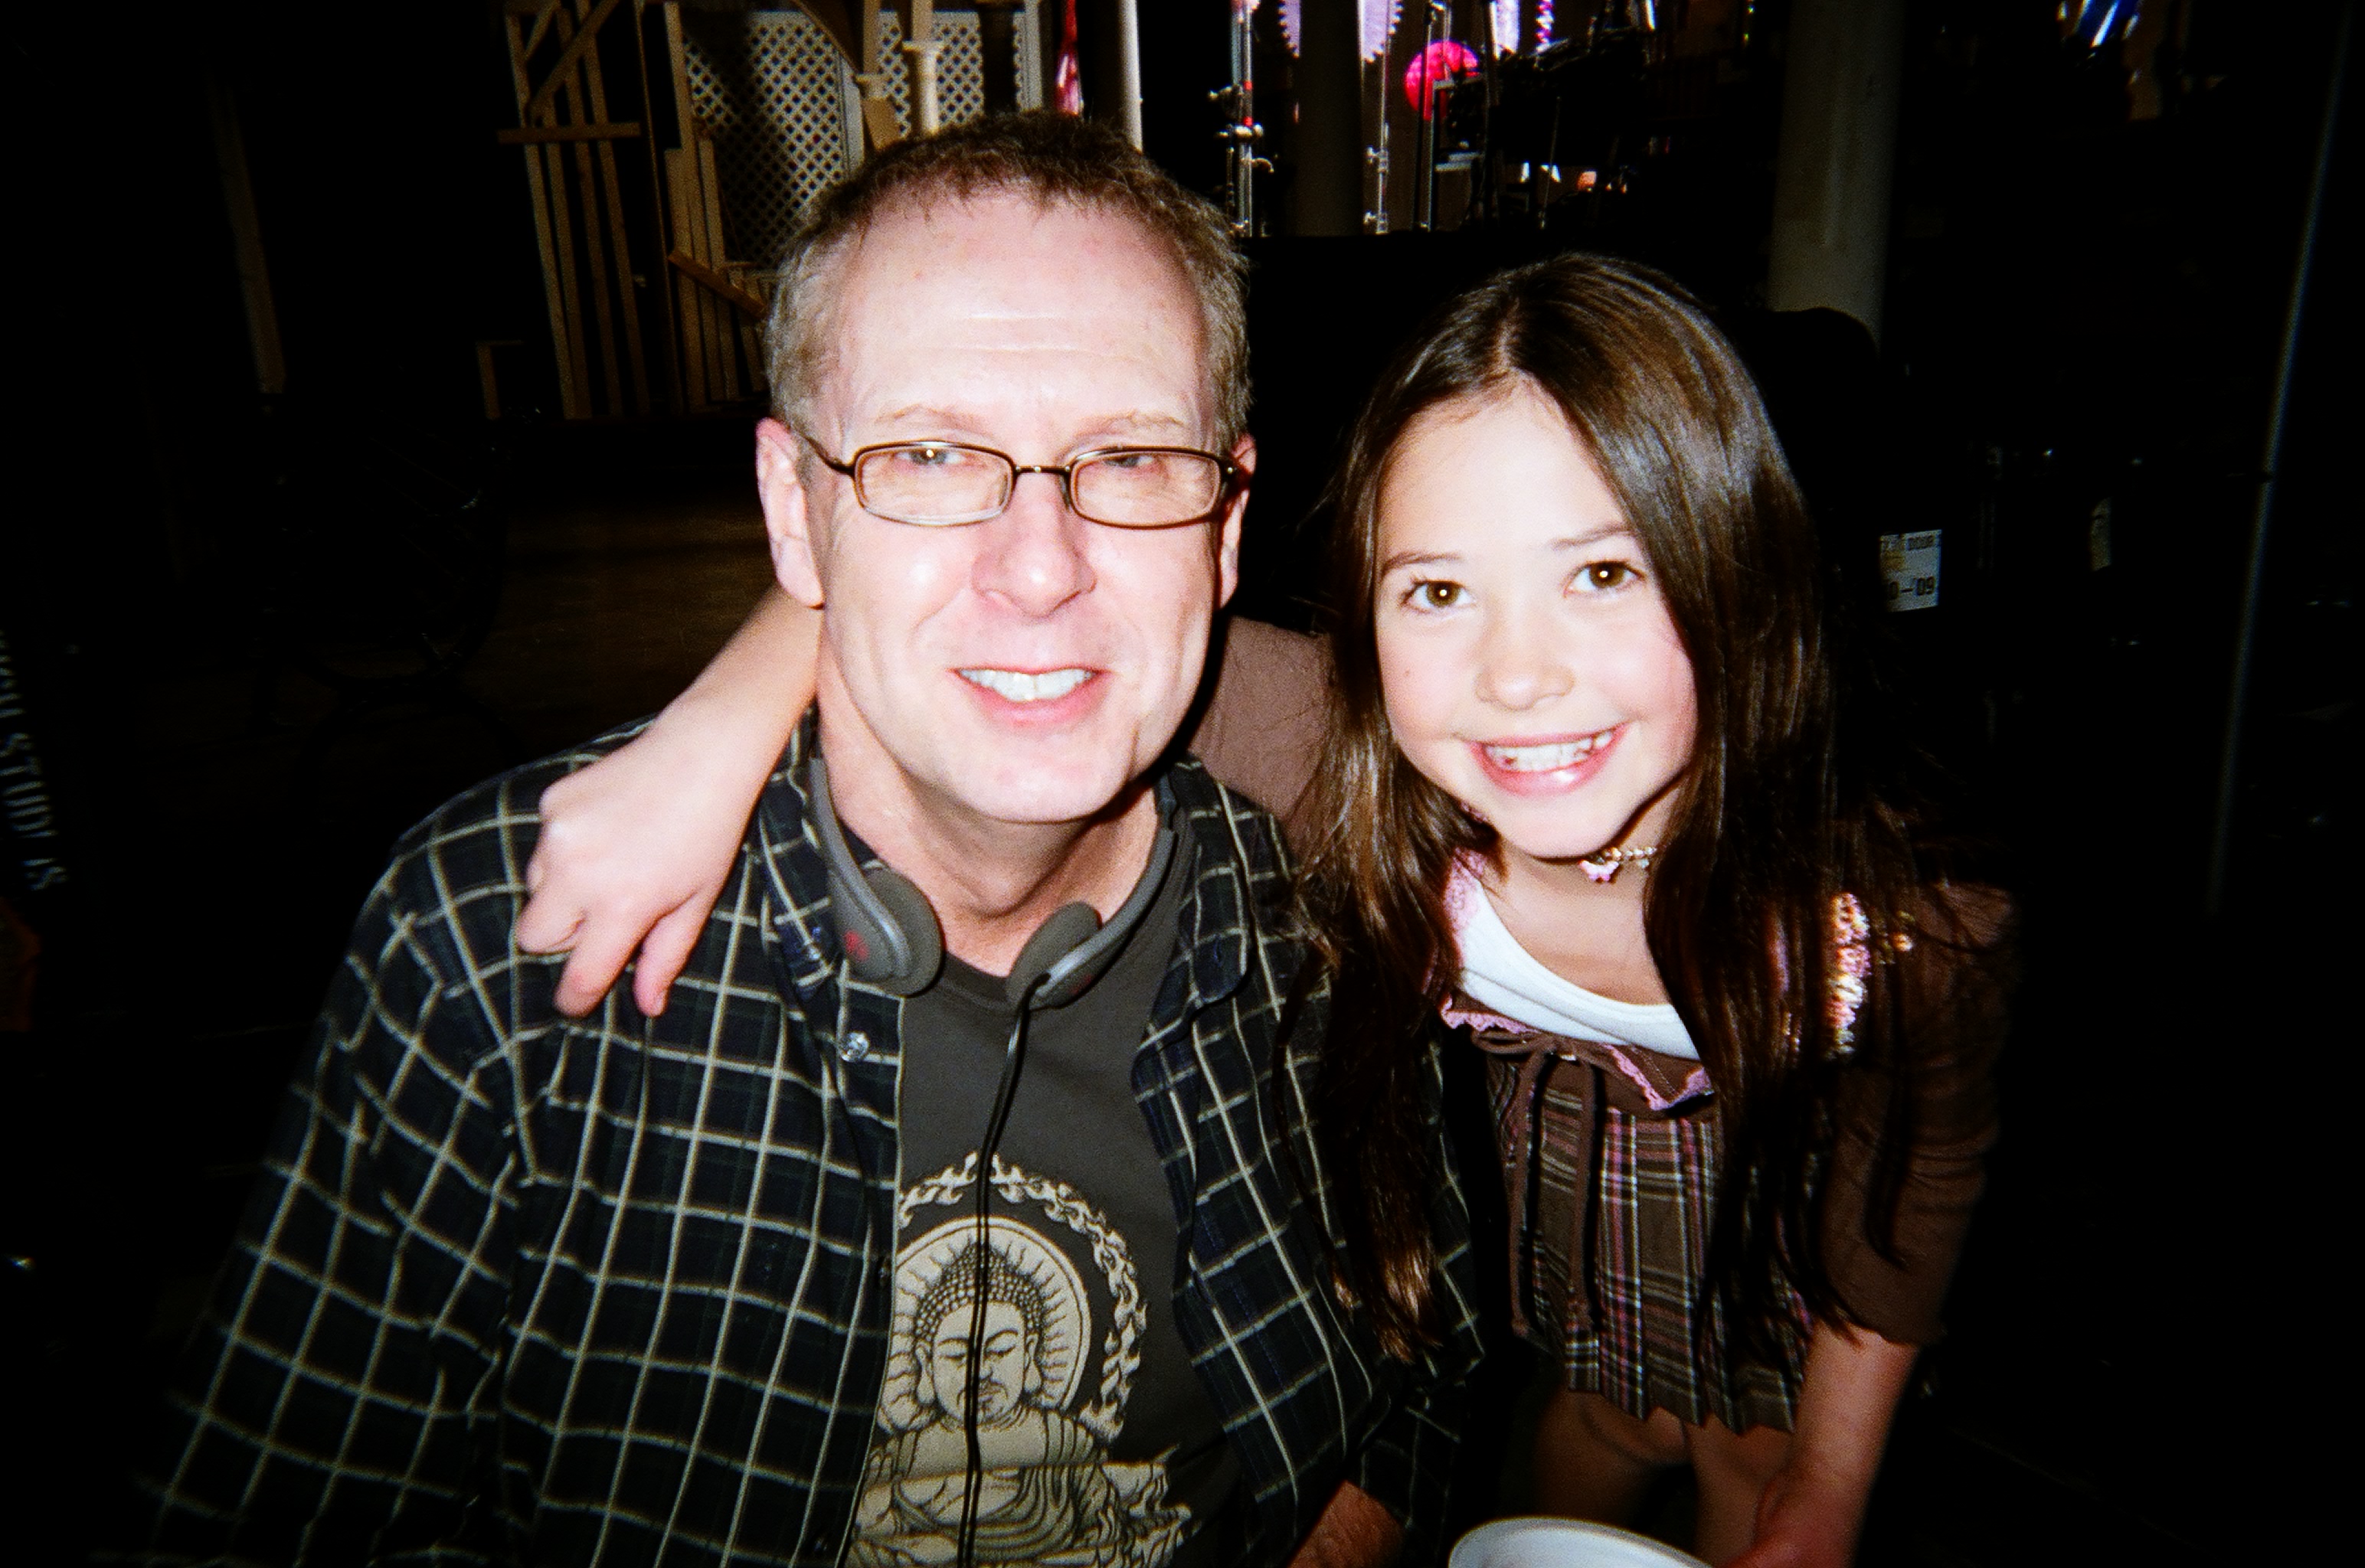 Chelsea Smith & Norman Buckley on the set of the O.C.